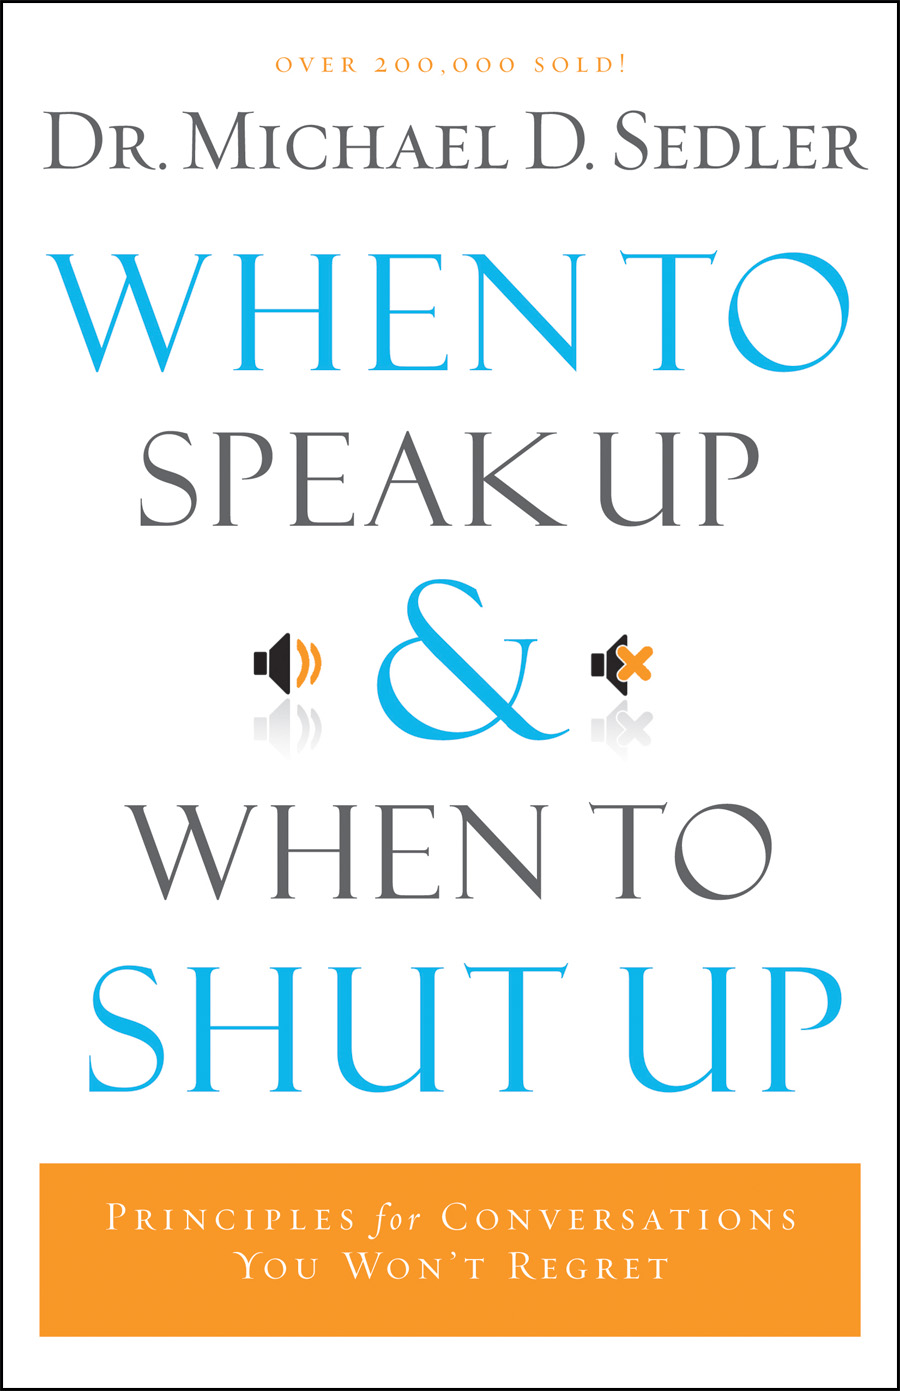 When to Speak Up and When To Shut Up [eBook]